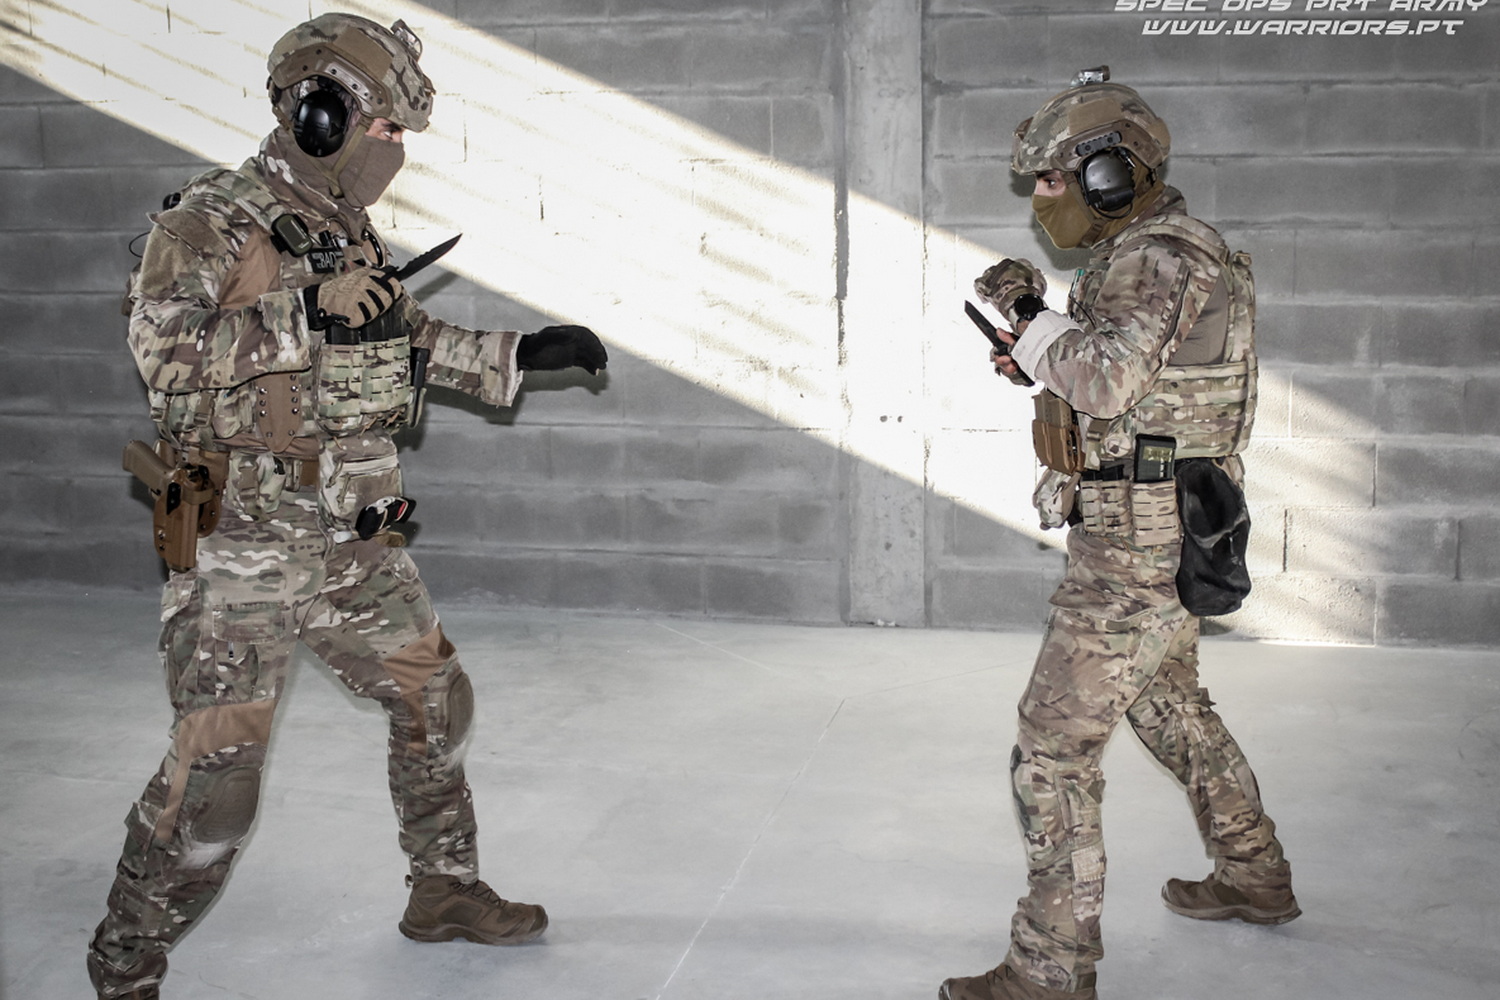 Hand-to-hand combat - Portuguese Army Special Operations